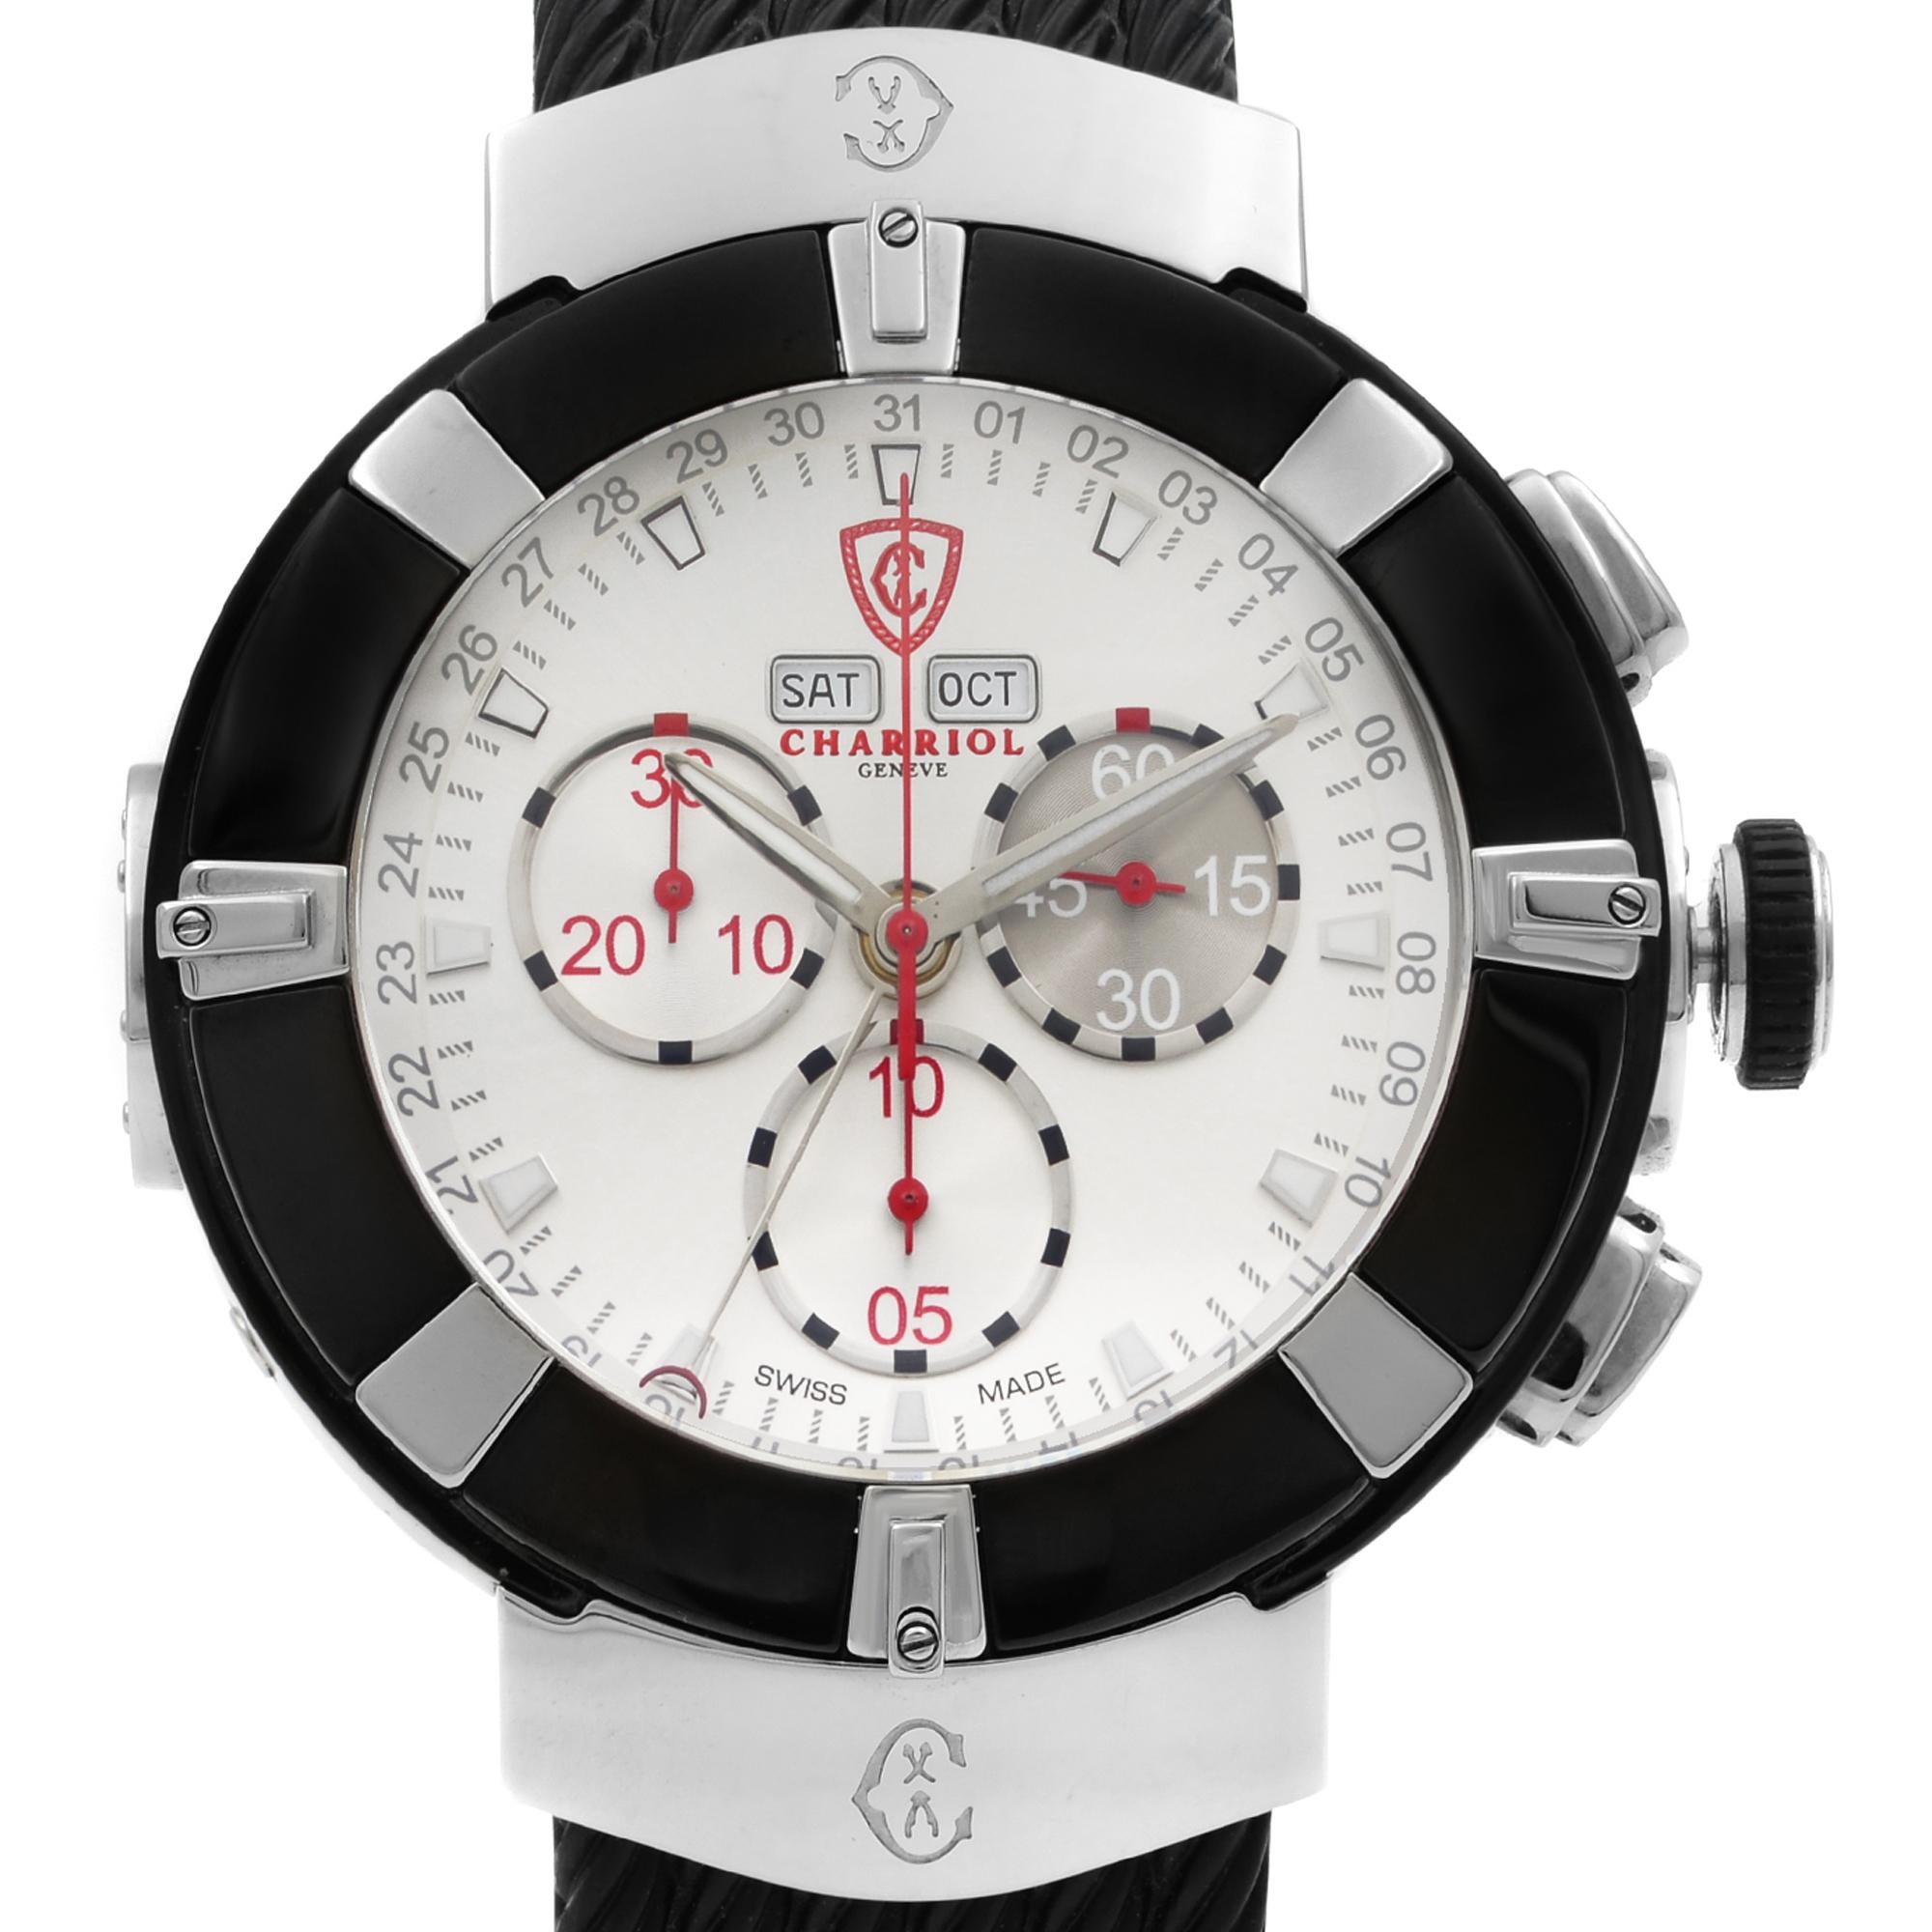 Display Model Charriol Celtica Day Date Month Steel Silver Dial Quartz Mens Watch. This Beautiful Timepiece Features: A Fresh Ultra-Readable New Dial, A Tactile Sand-Brushed Bezel and Statement Red Hands, Driven by a Swiss-Made Quartz Chronograph